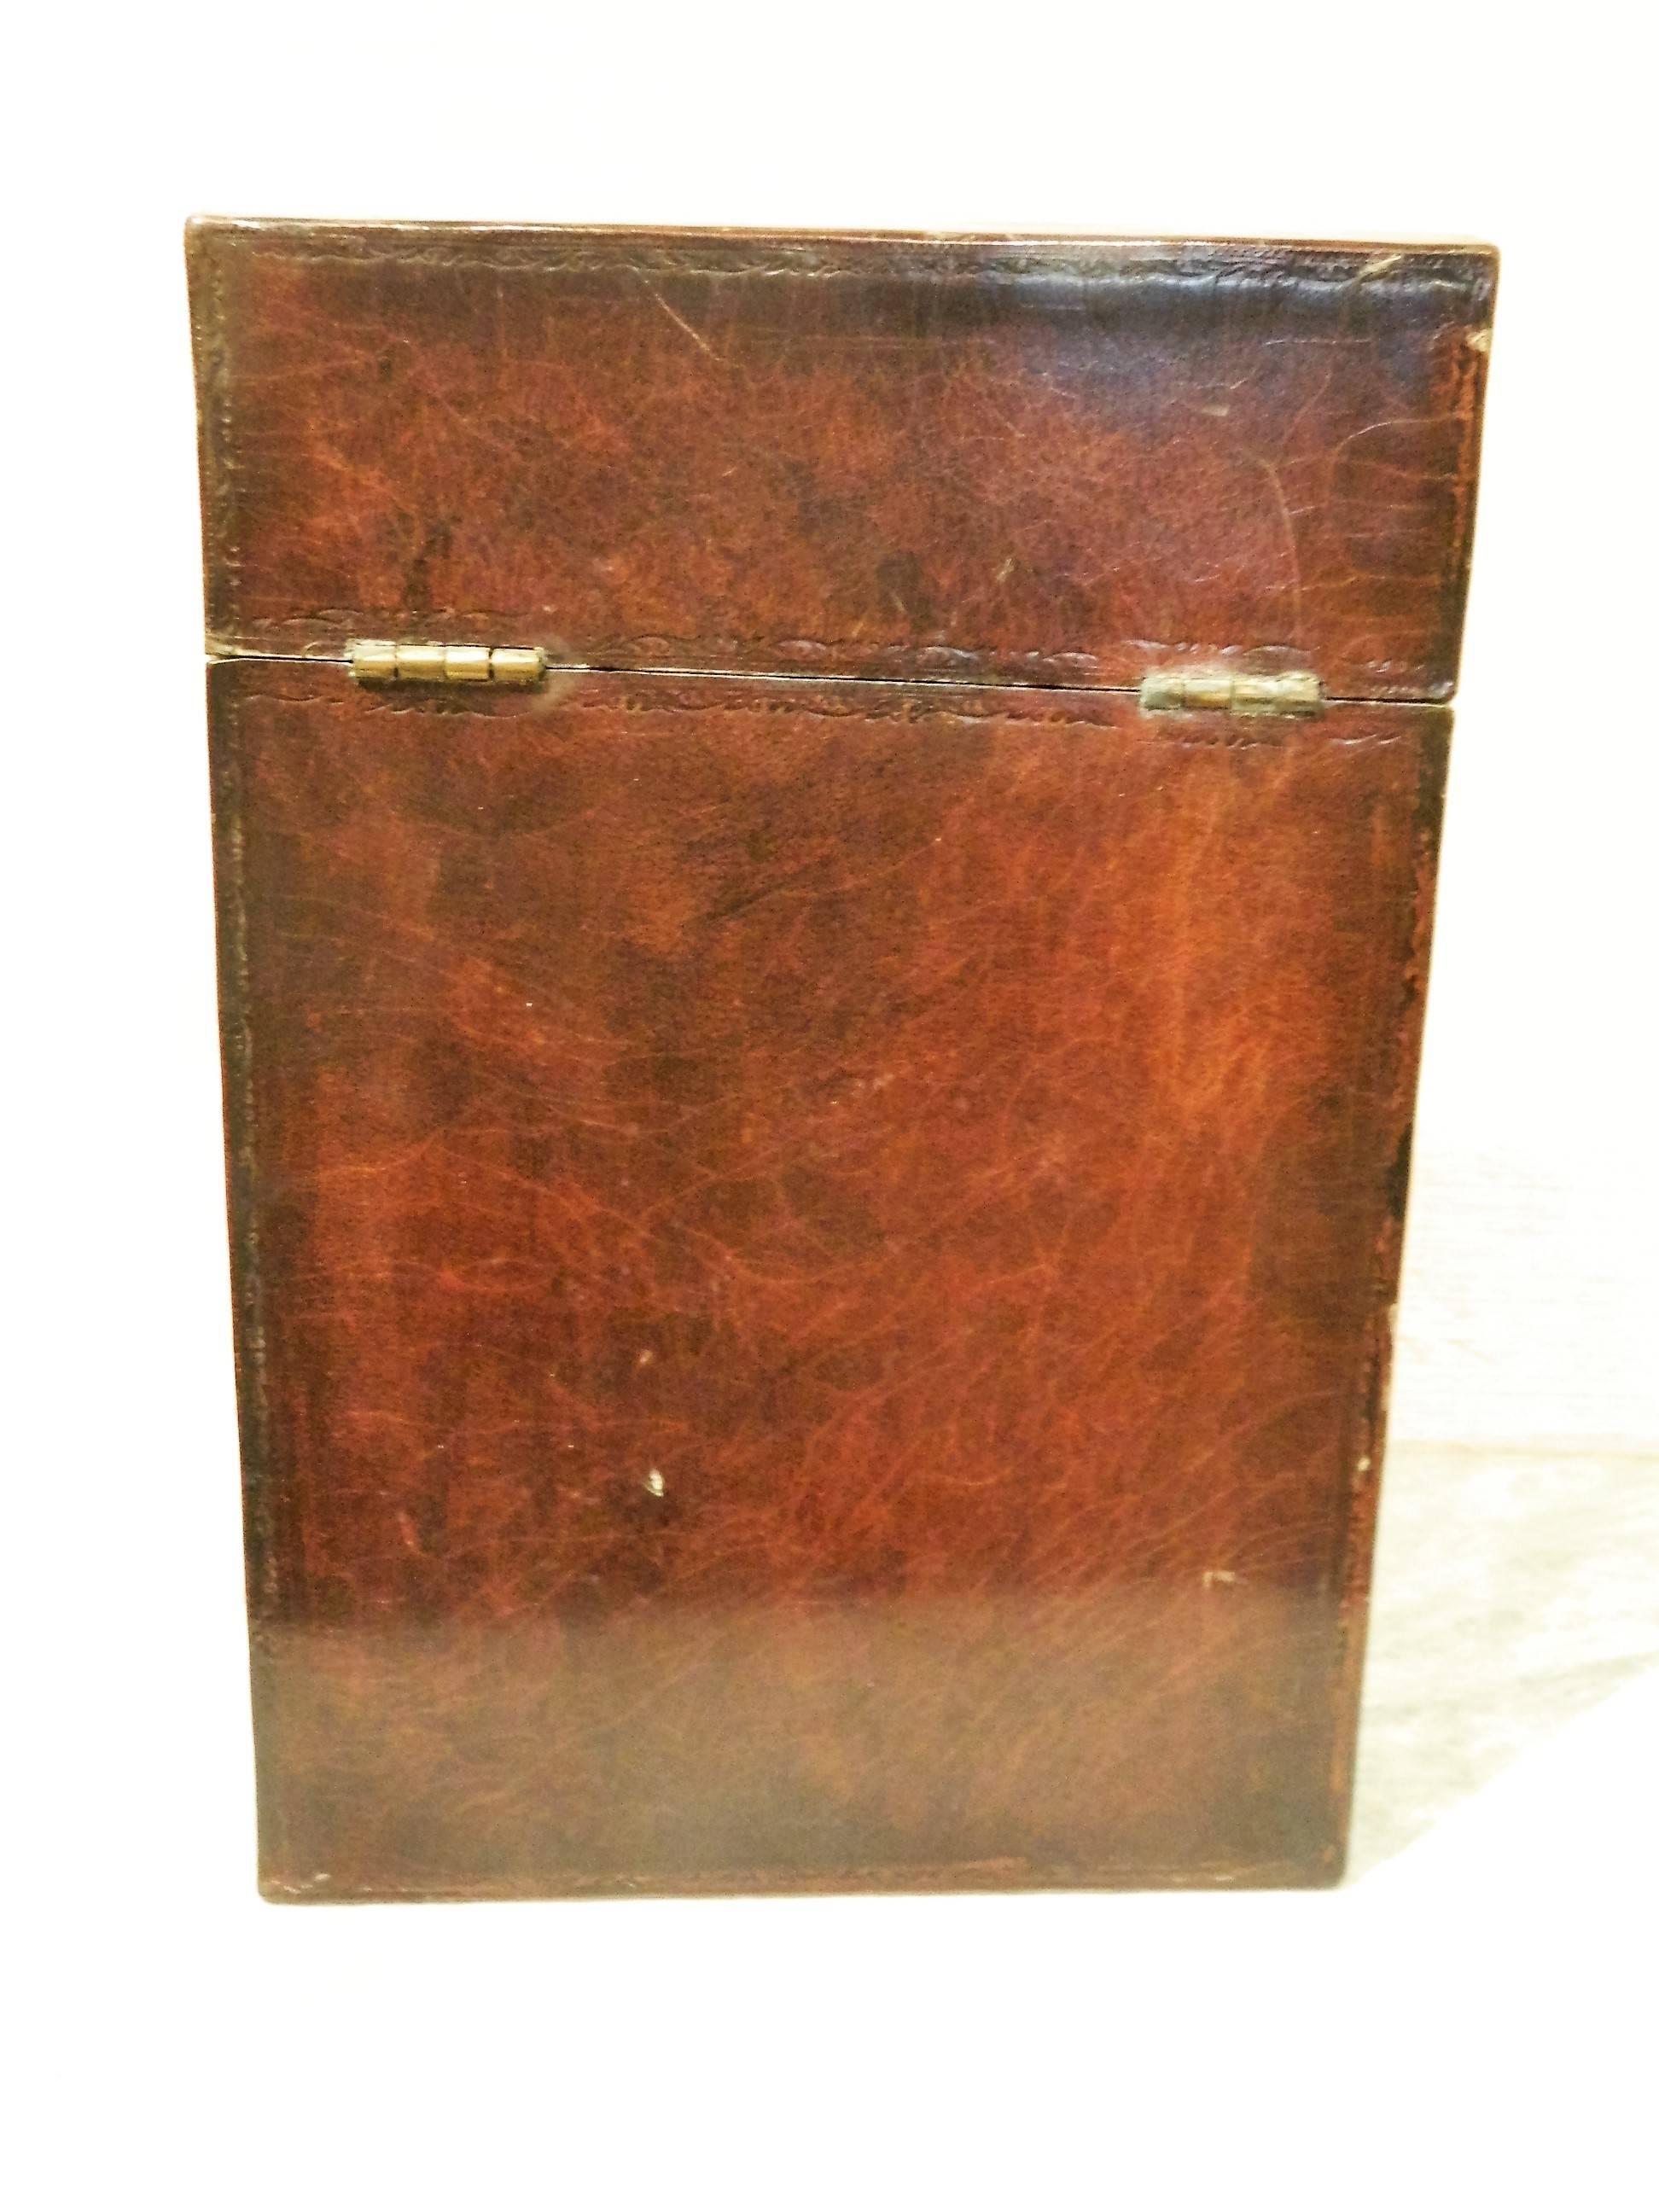 Leather box by Maitland Smith, mid-20th century.
                      